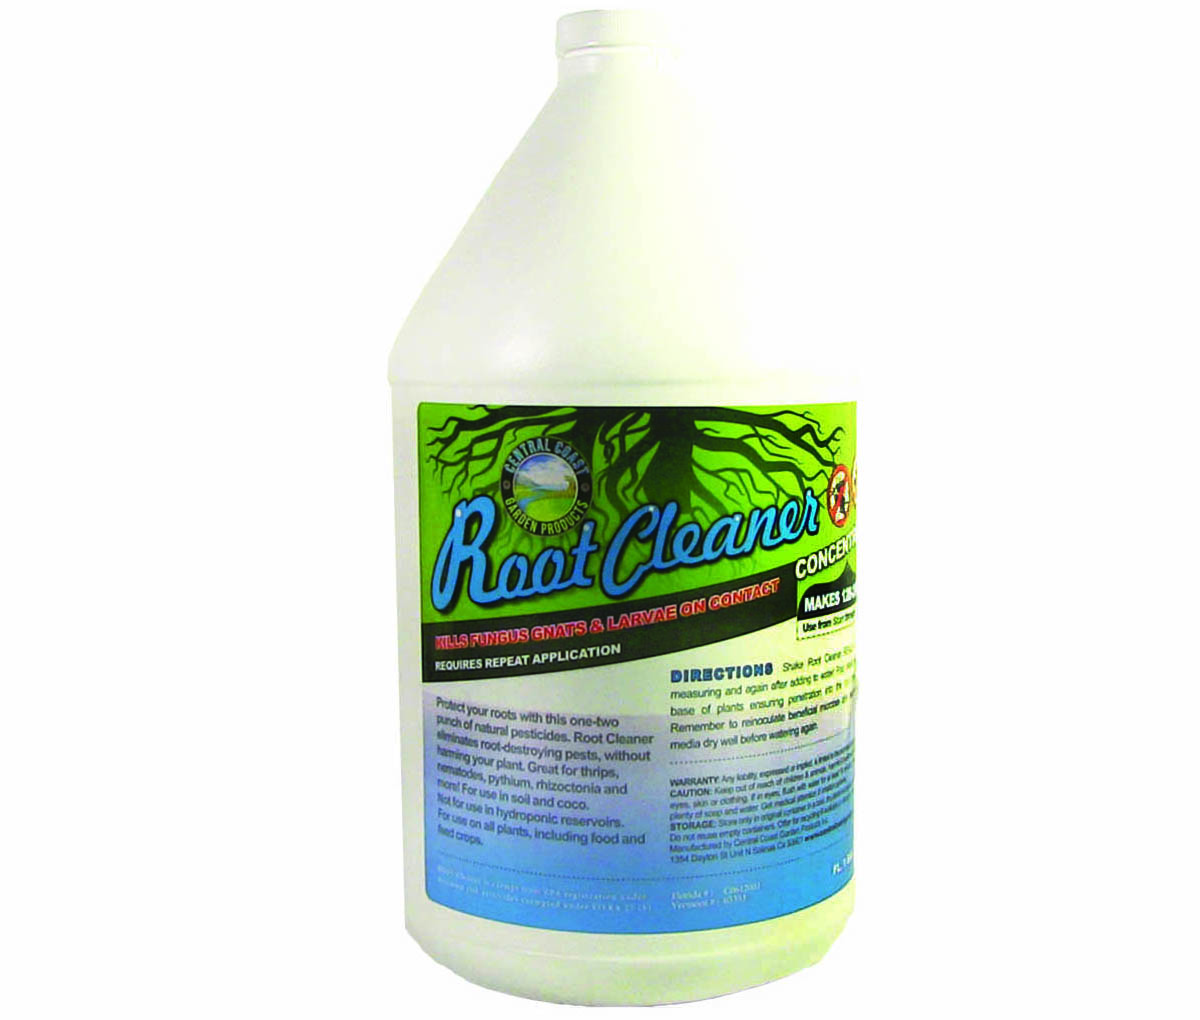 Picture for Root Cleaner, 1 gal